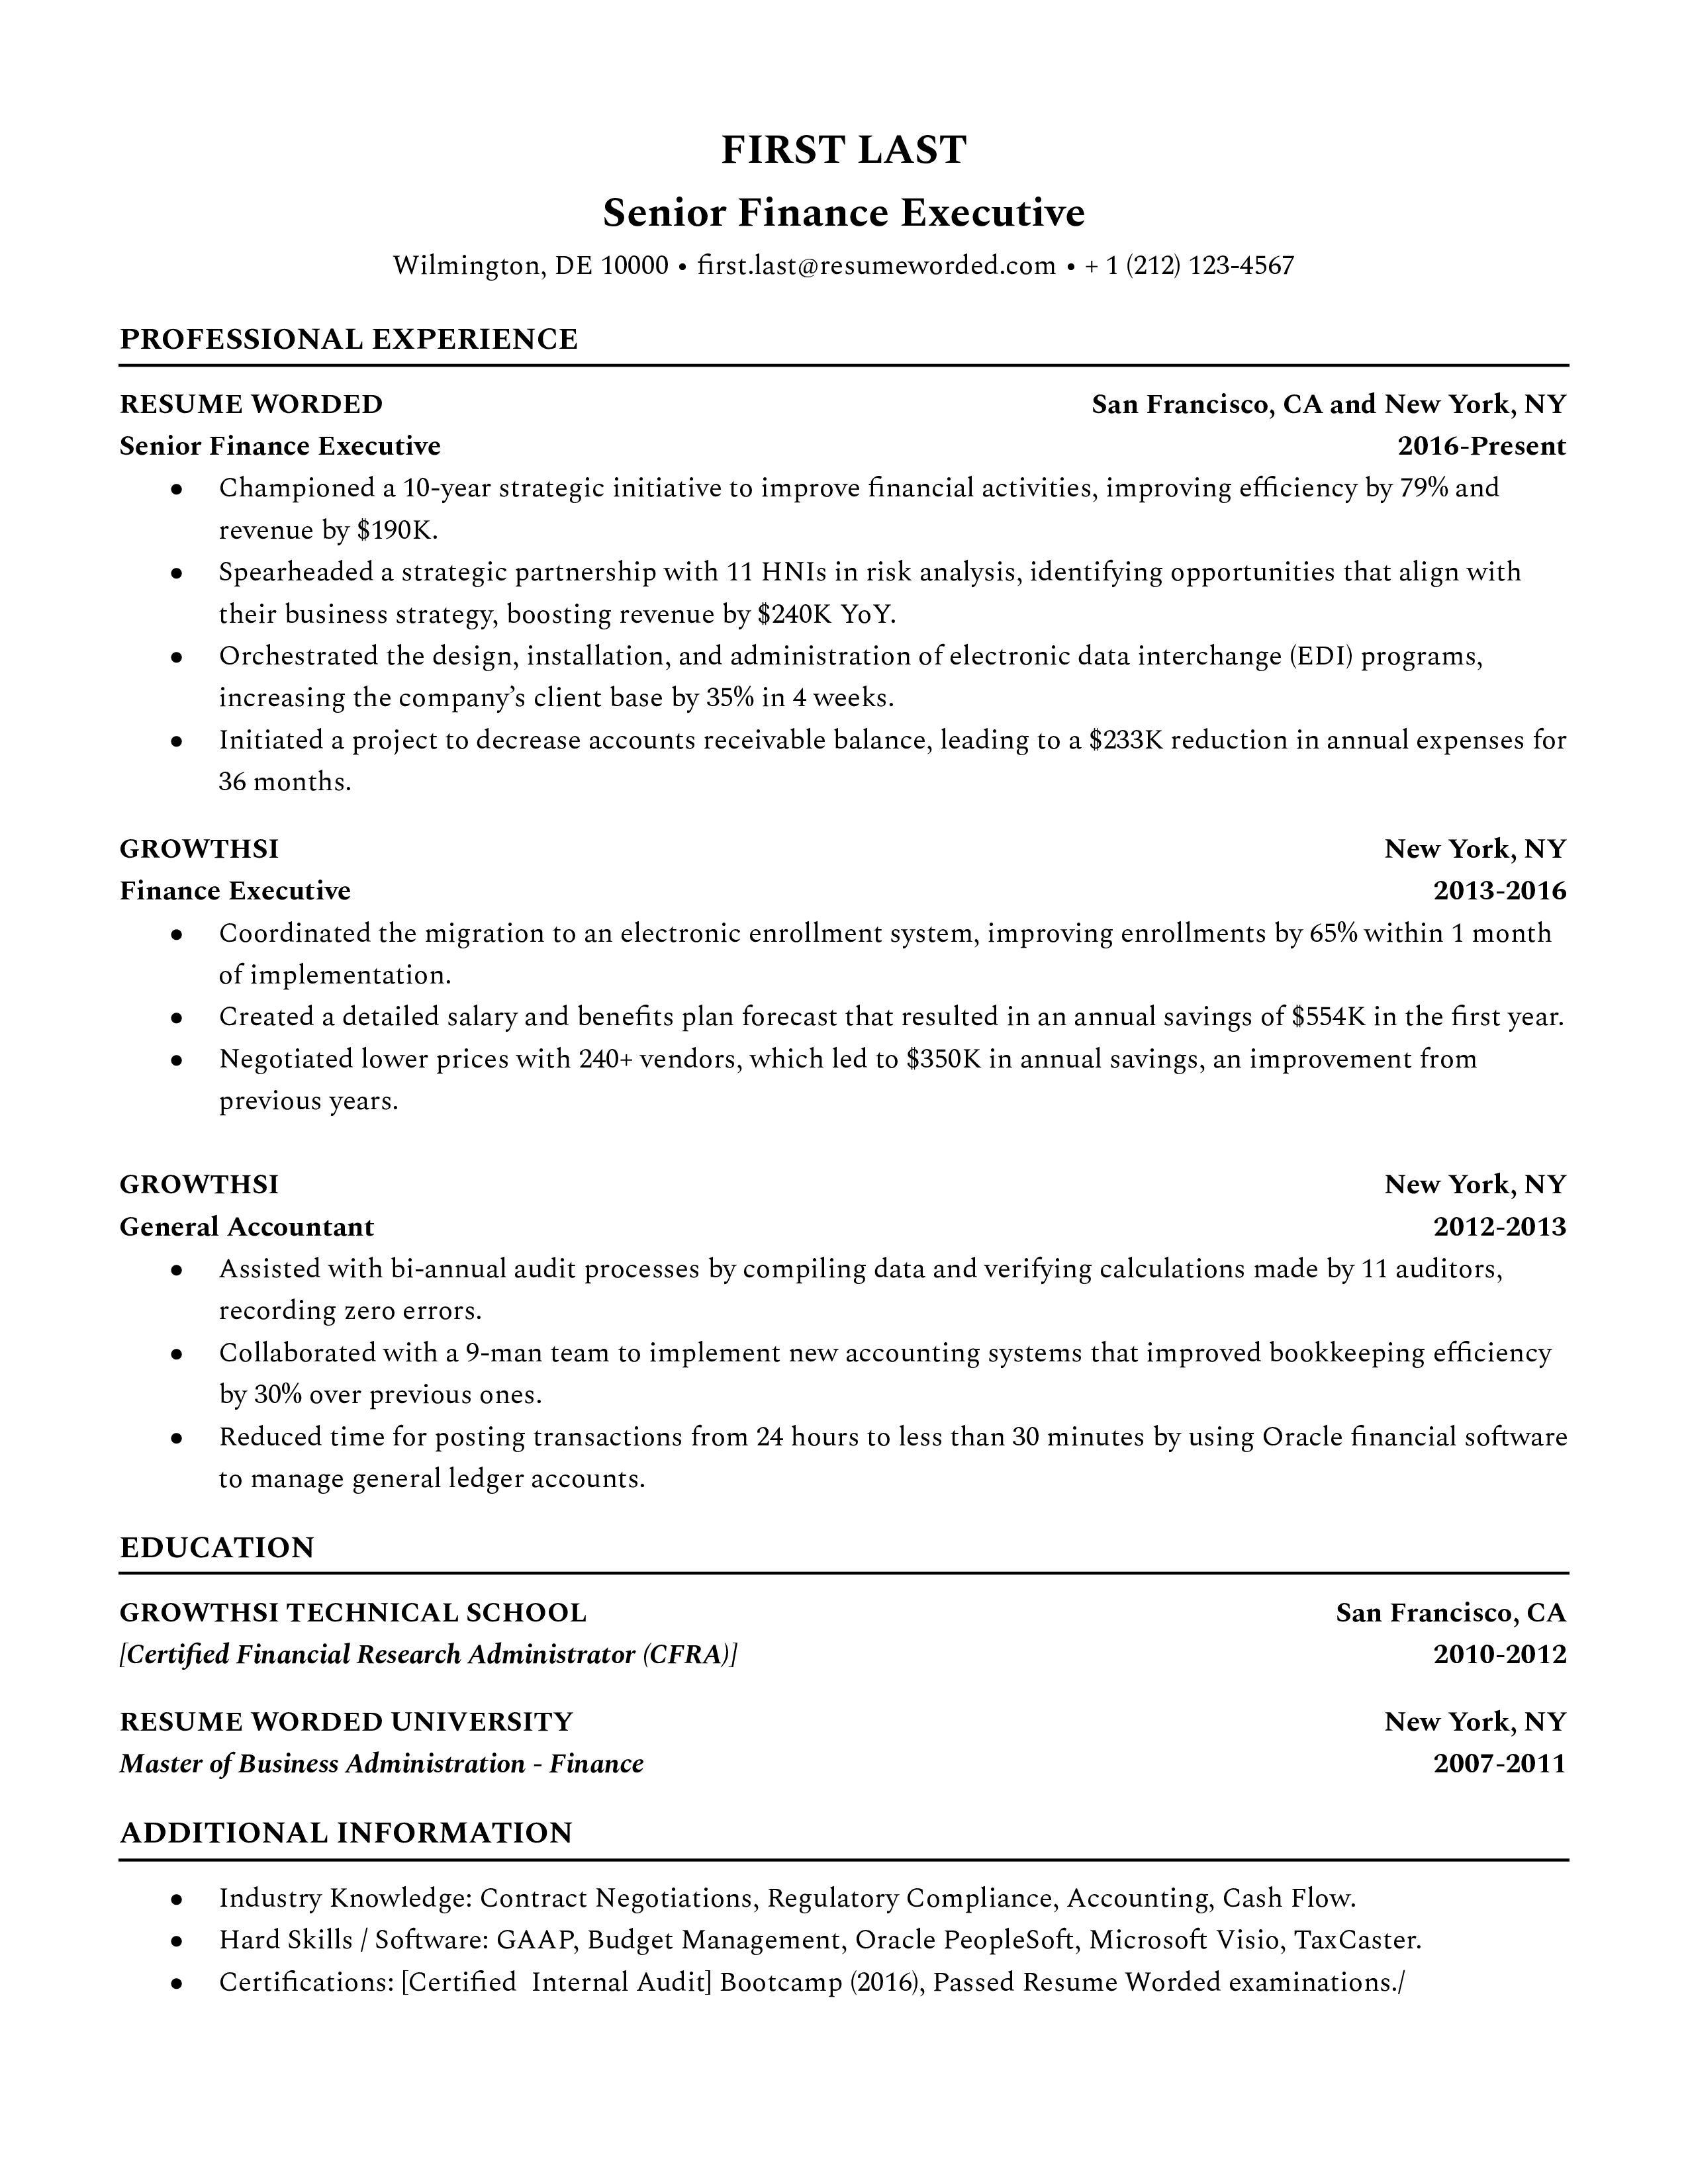 Screenshot of a resume for a Senior Finance Executive role focusing on strategic skills and technical proficiency.